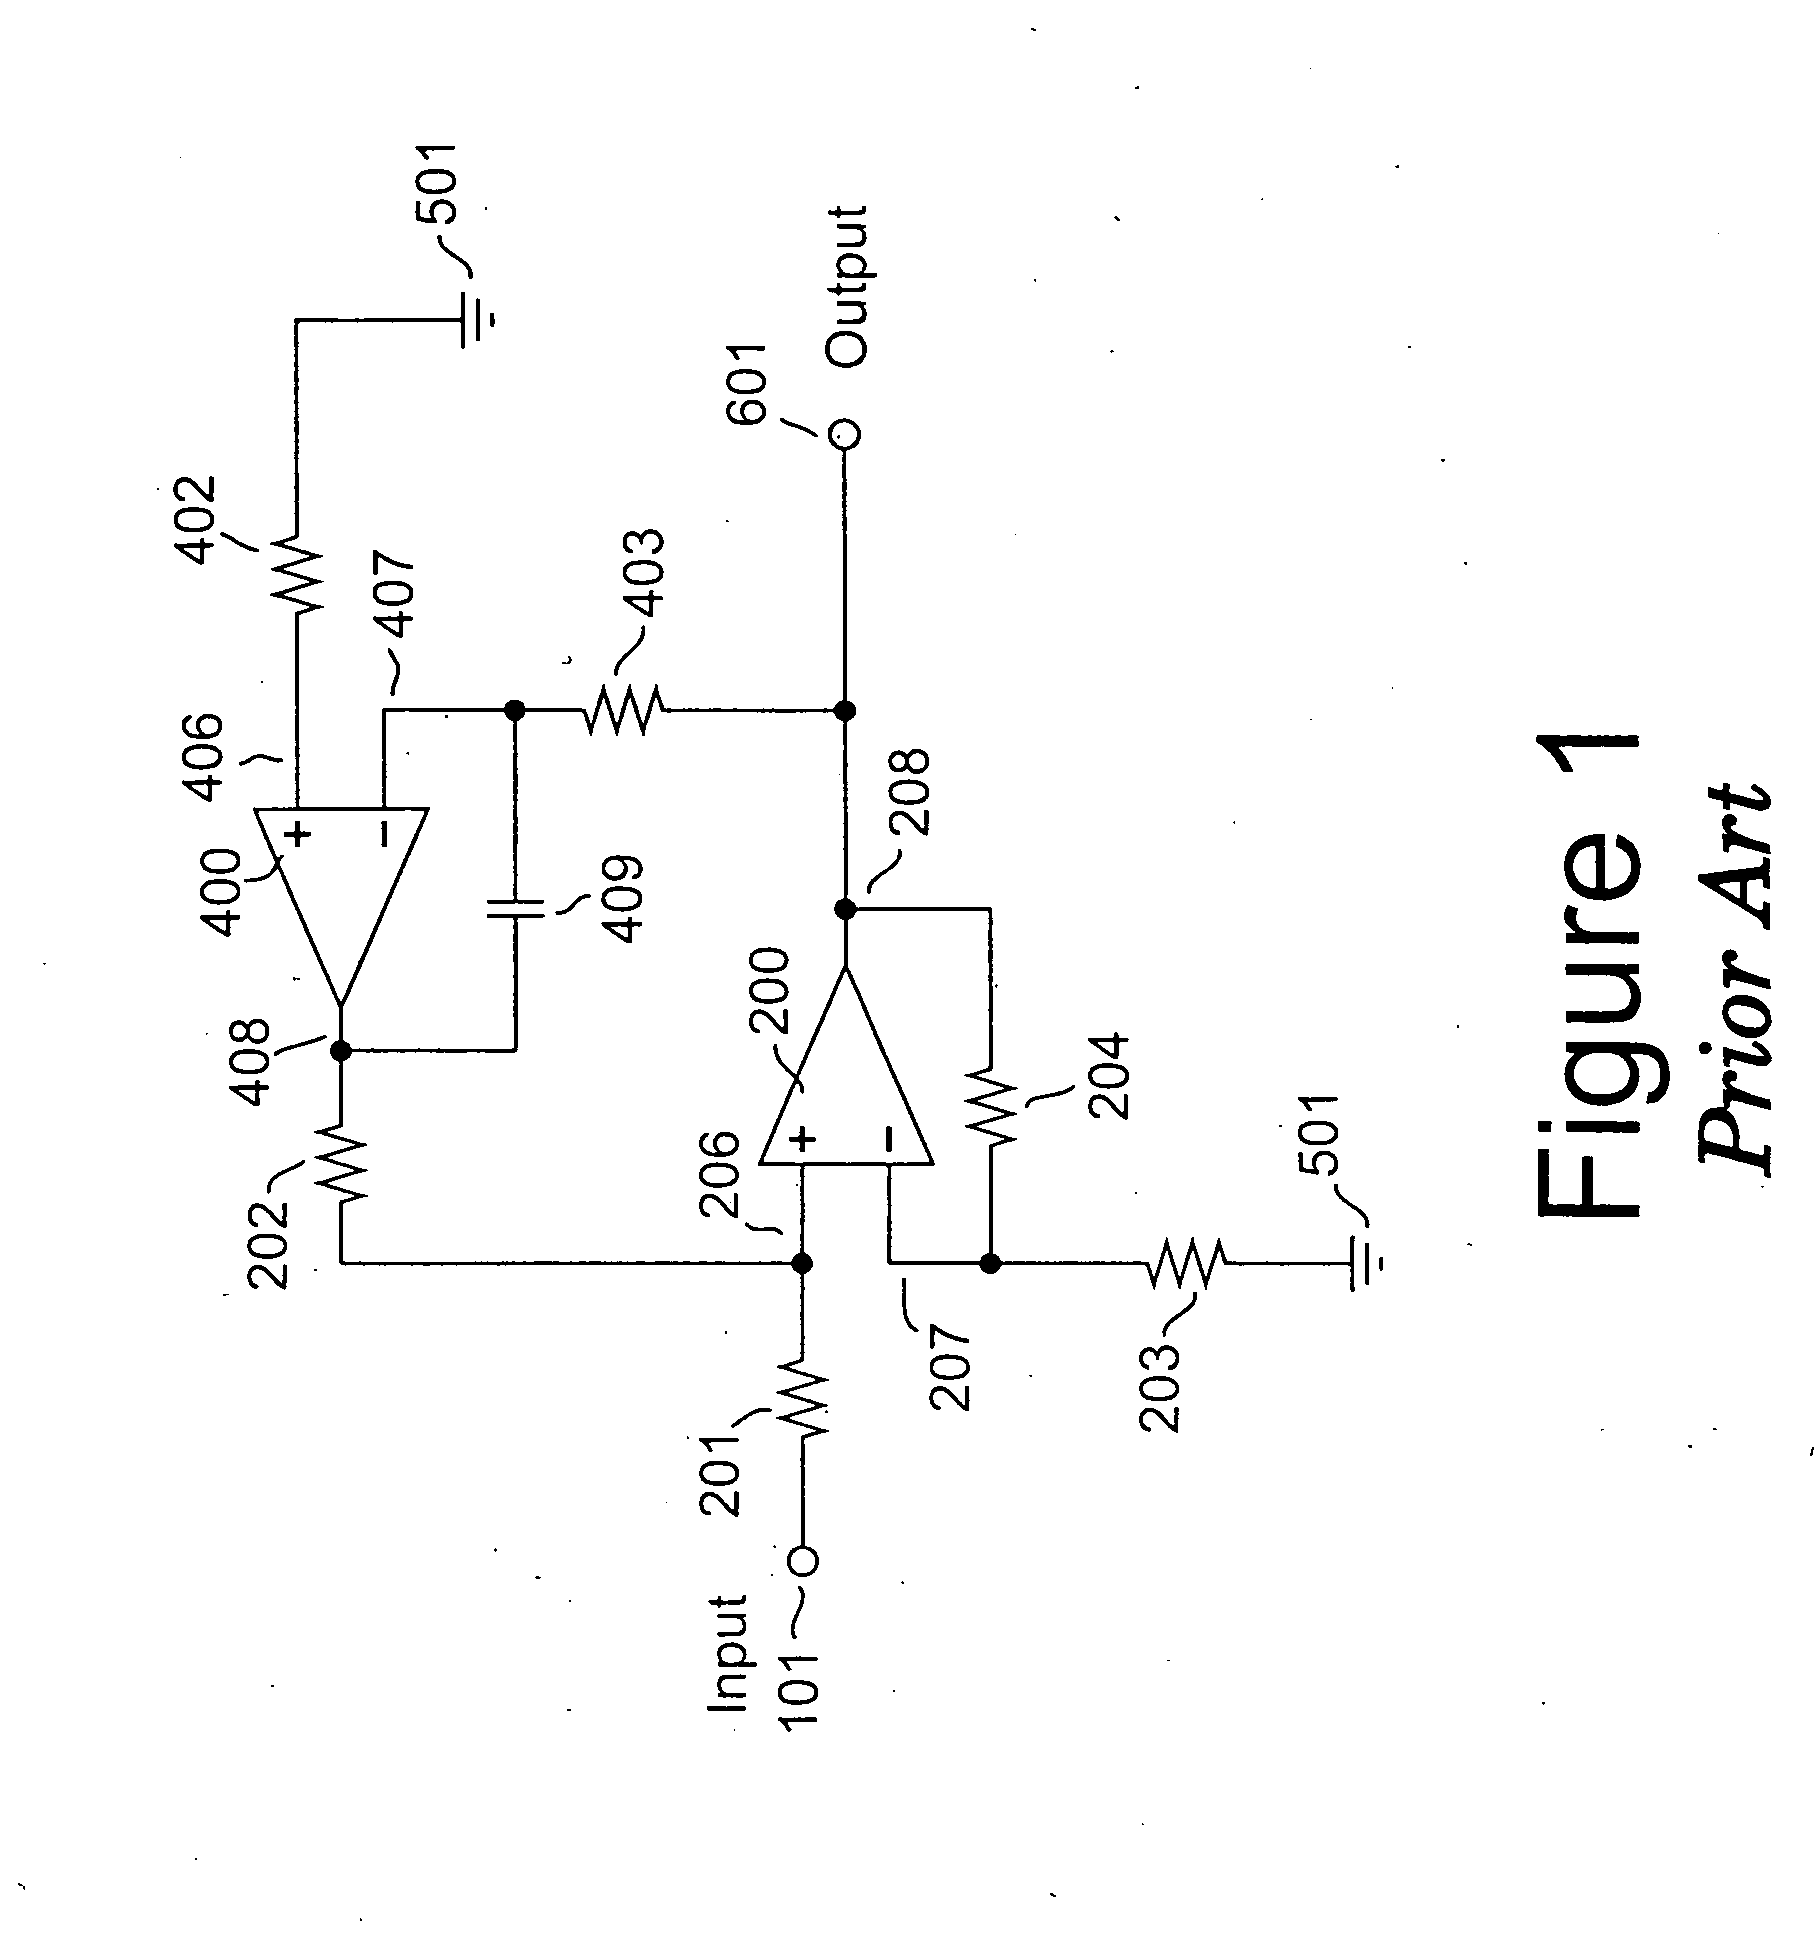 Amplifier system with current-mode servo feedback